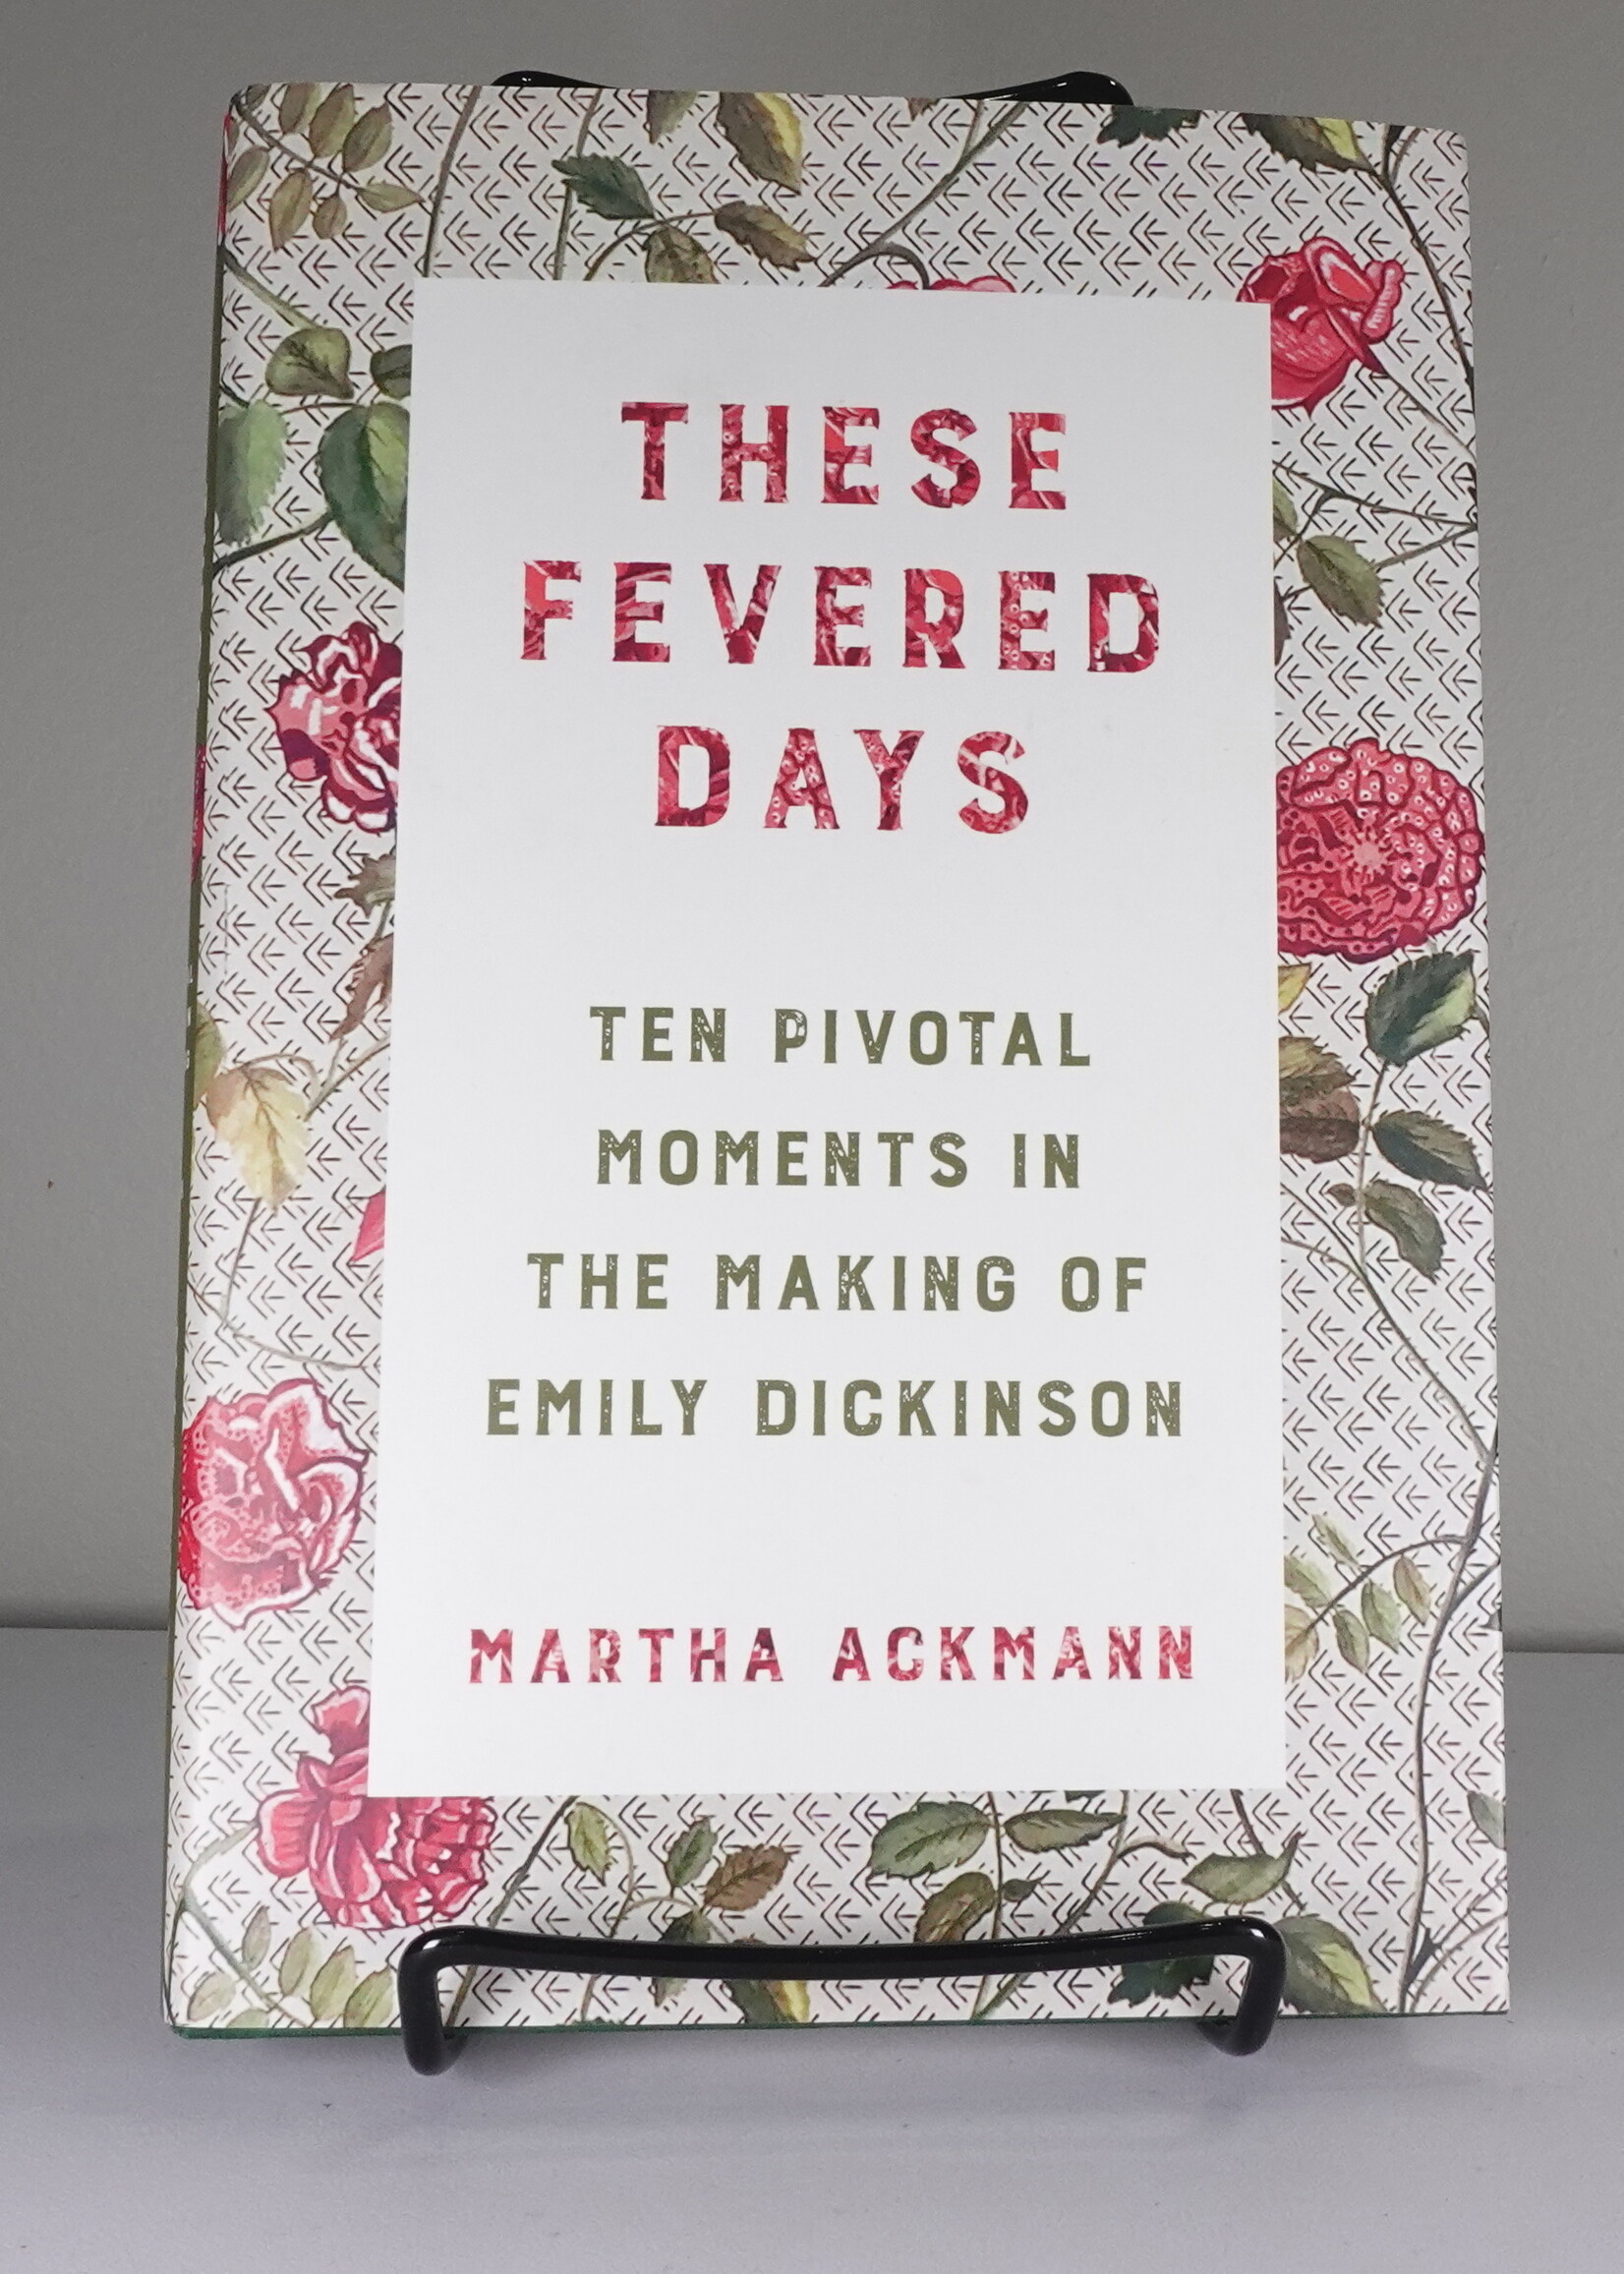 W. W. Norton These Fevered Days - Ten Pivotal Moments in the Making of Emily Dickinson